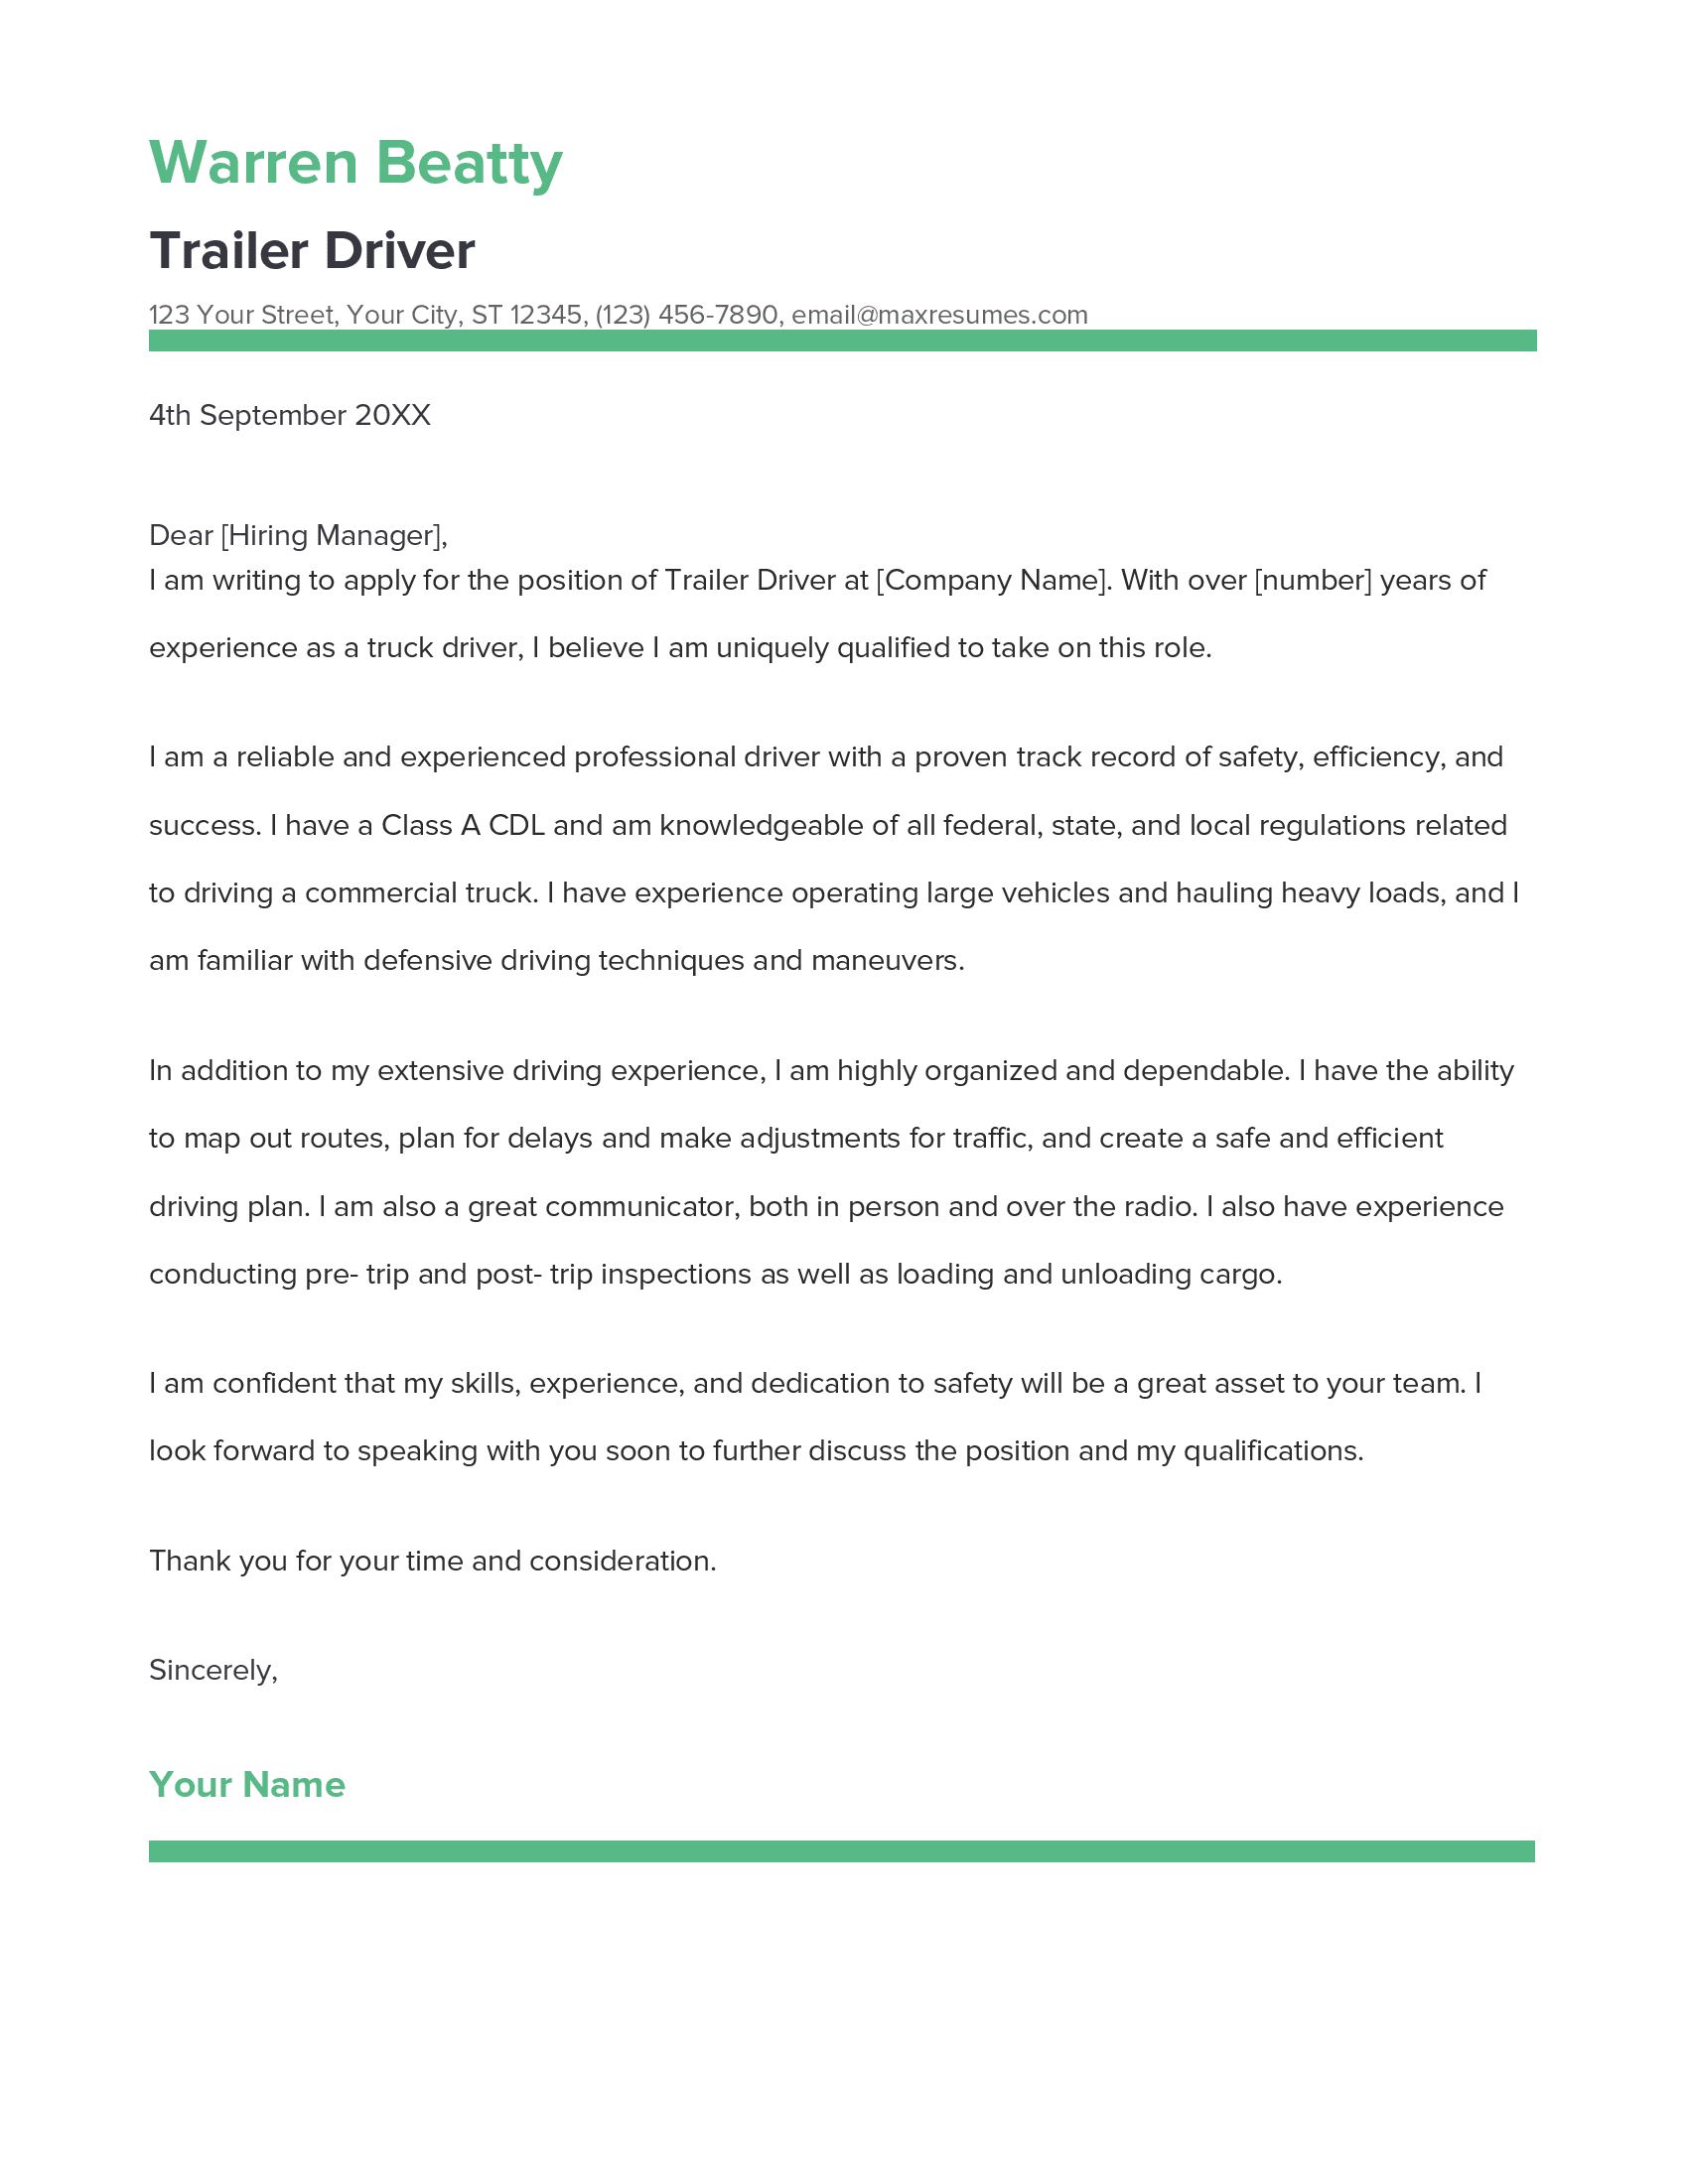 Trailer Driver Cover Letter Example